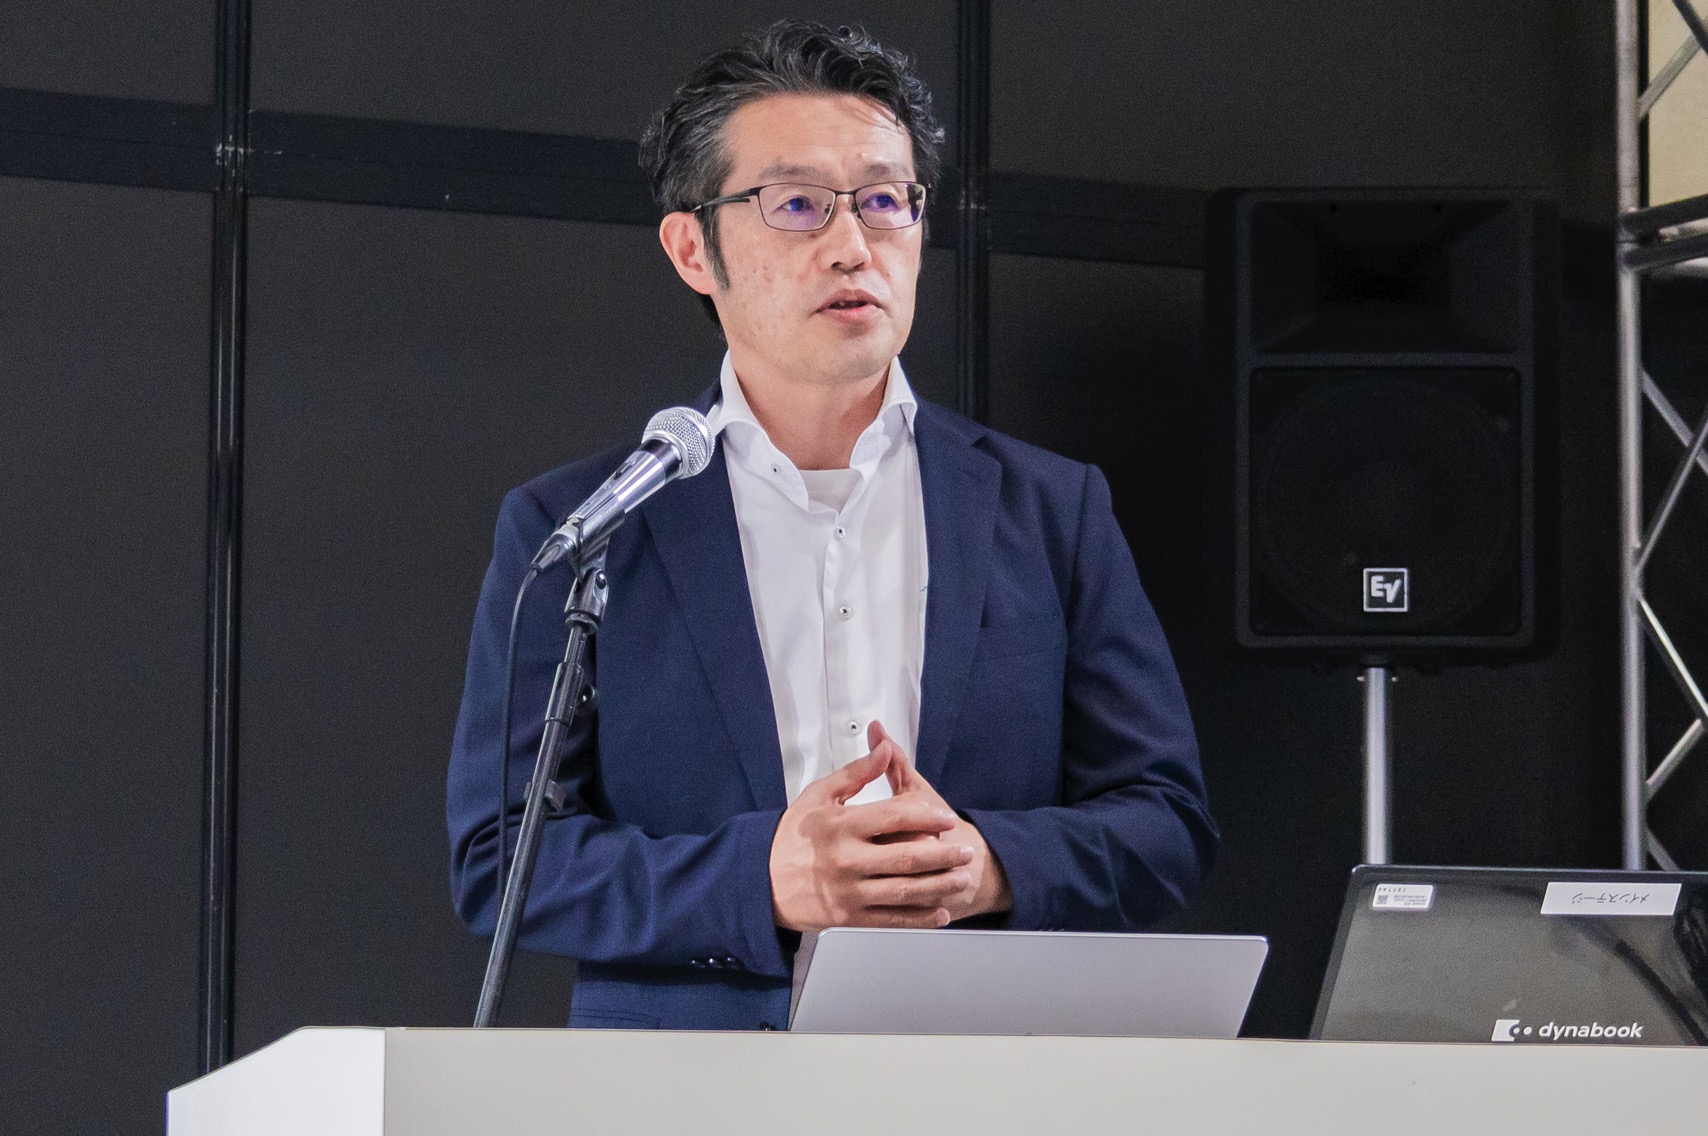 Koji gave a talk for the My-IoT project in the smart factory Japan 2022.